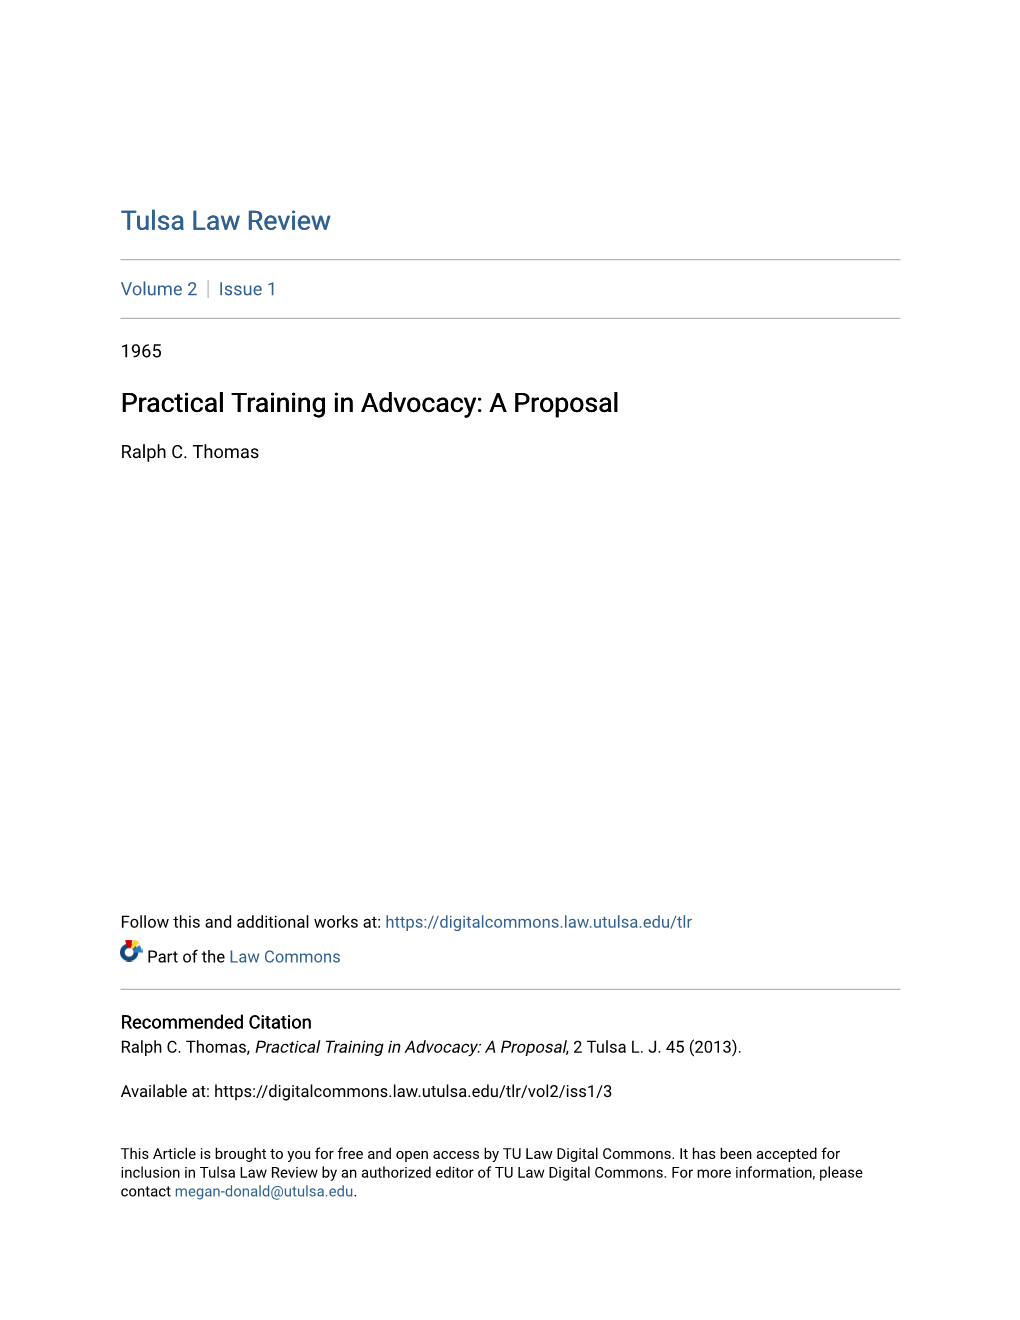 Practical Training in Advocacy: a Proposal